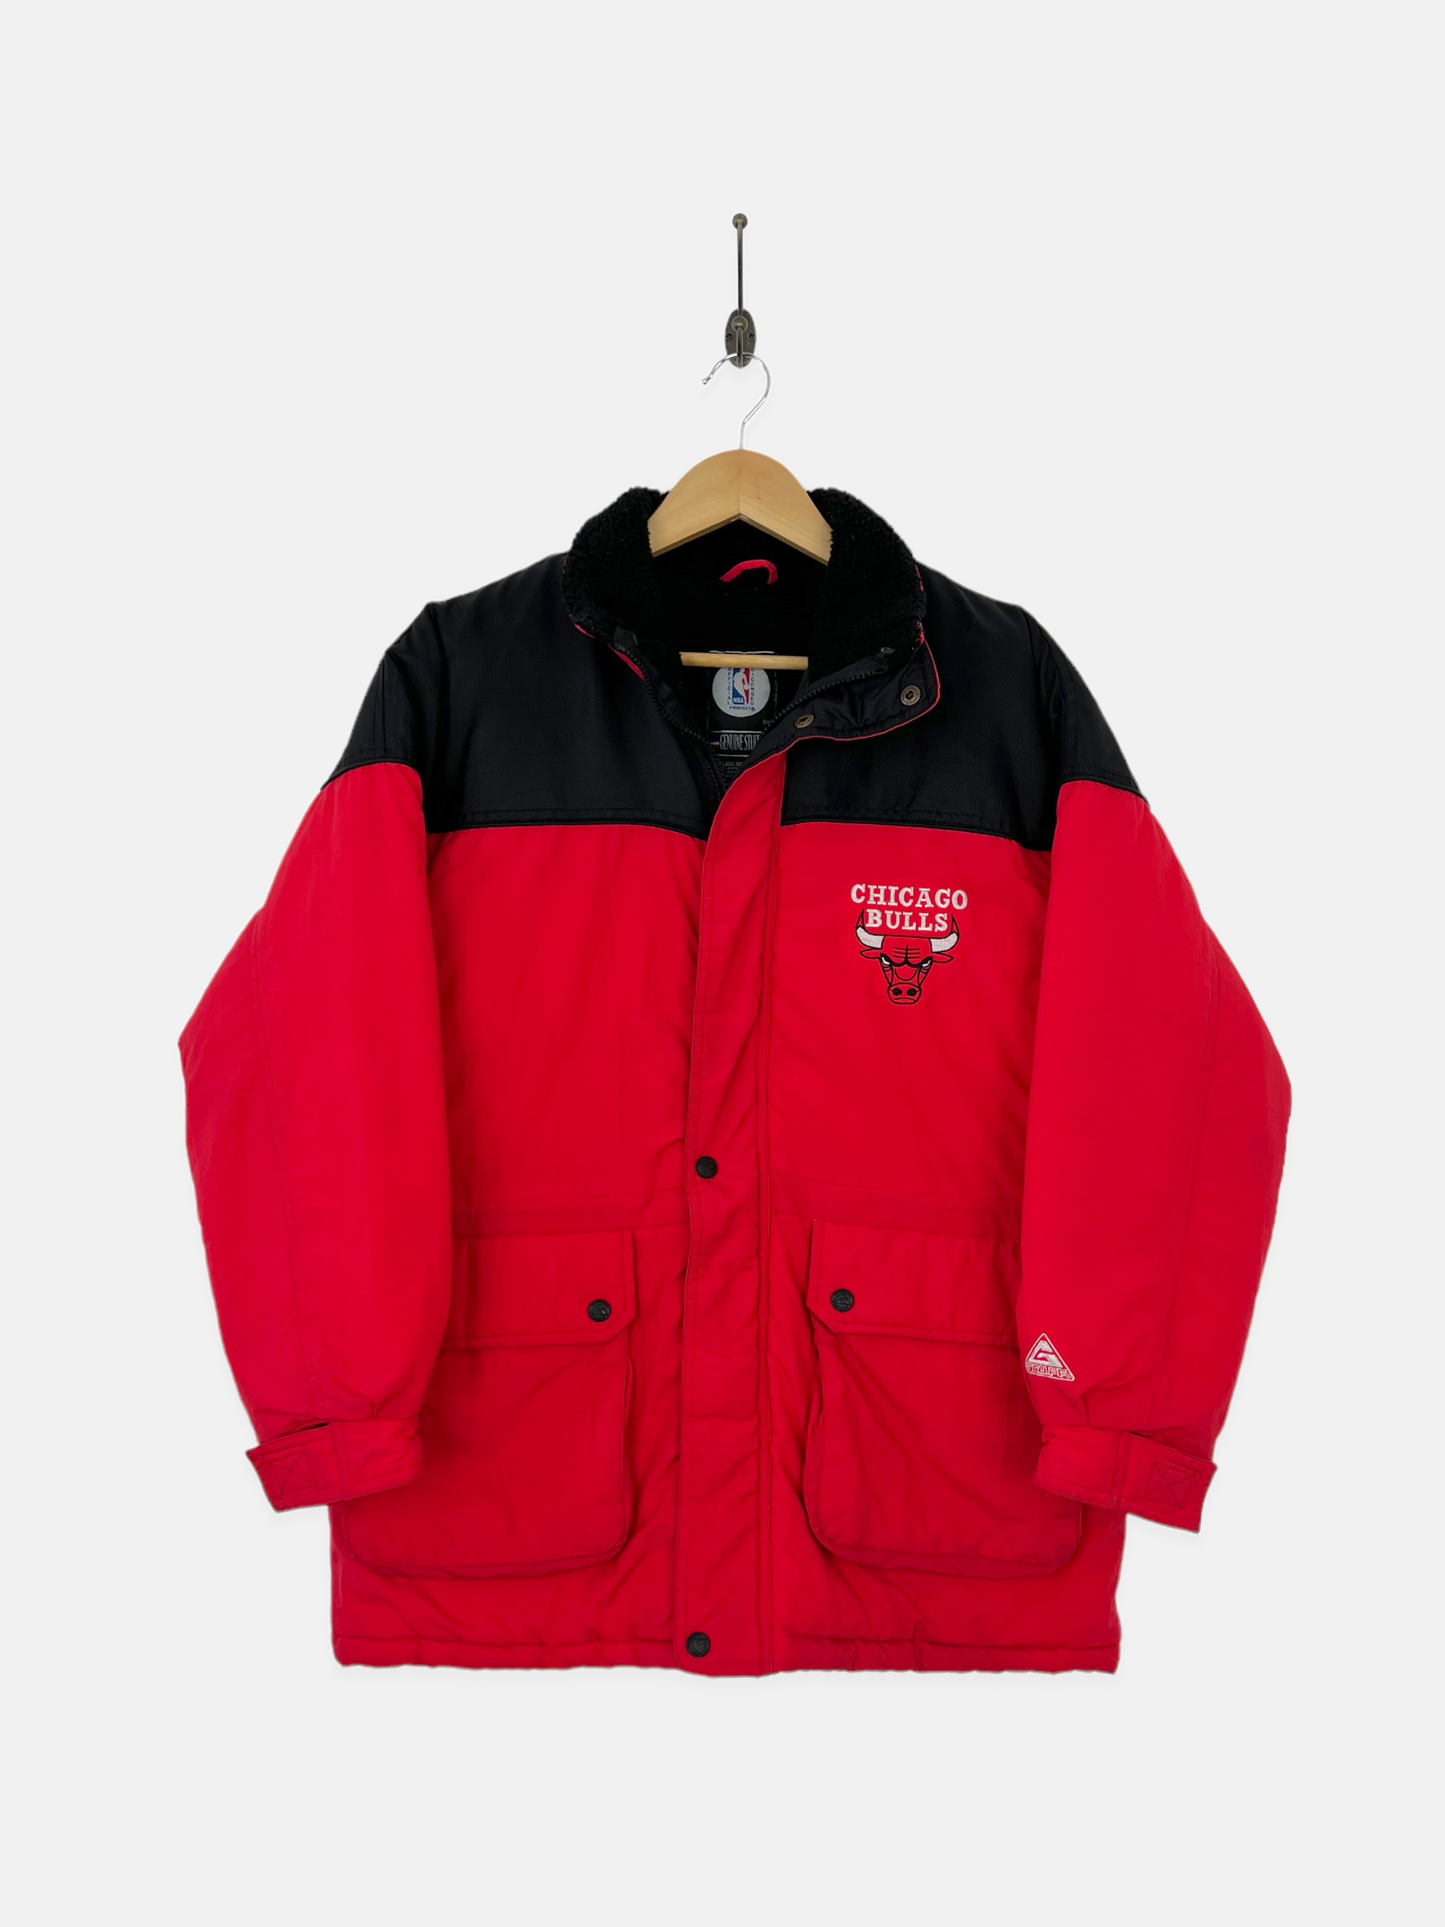 90's Chicago Bulls NBA Embroidered Vintage Puffer Jacket Size M